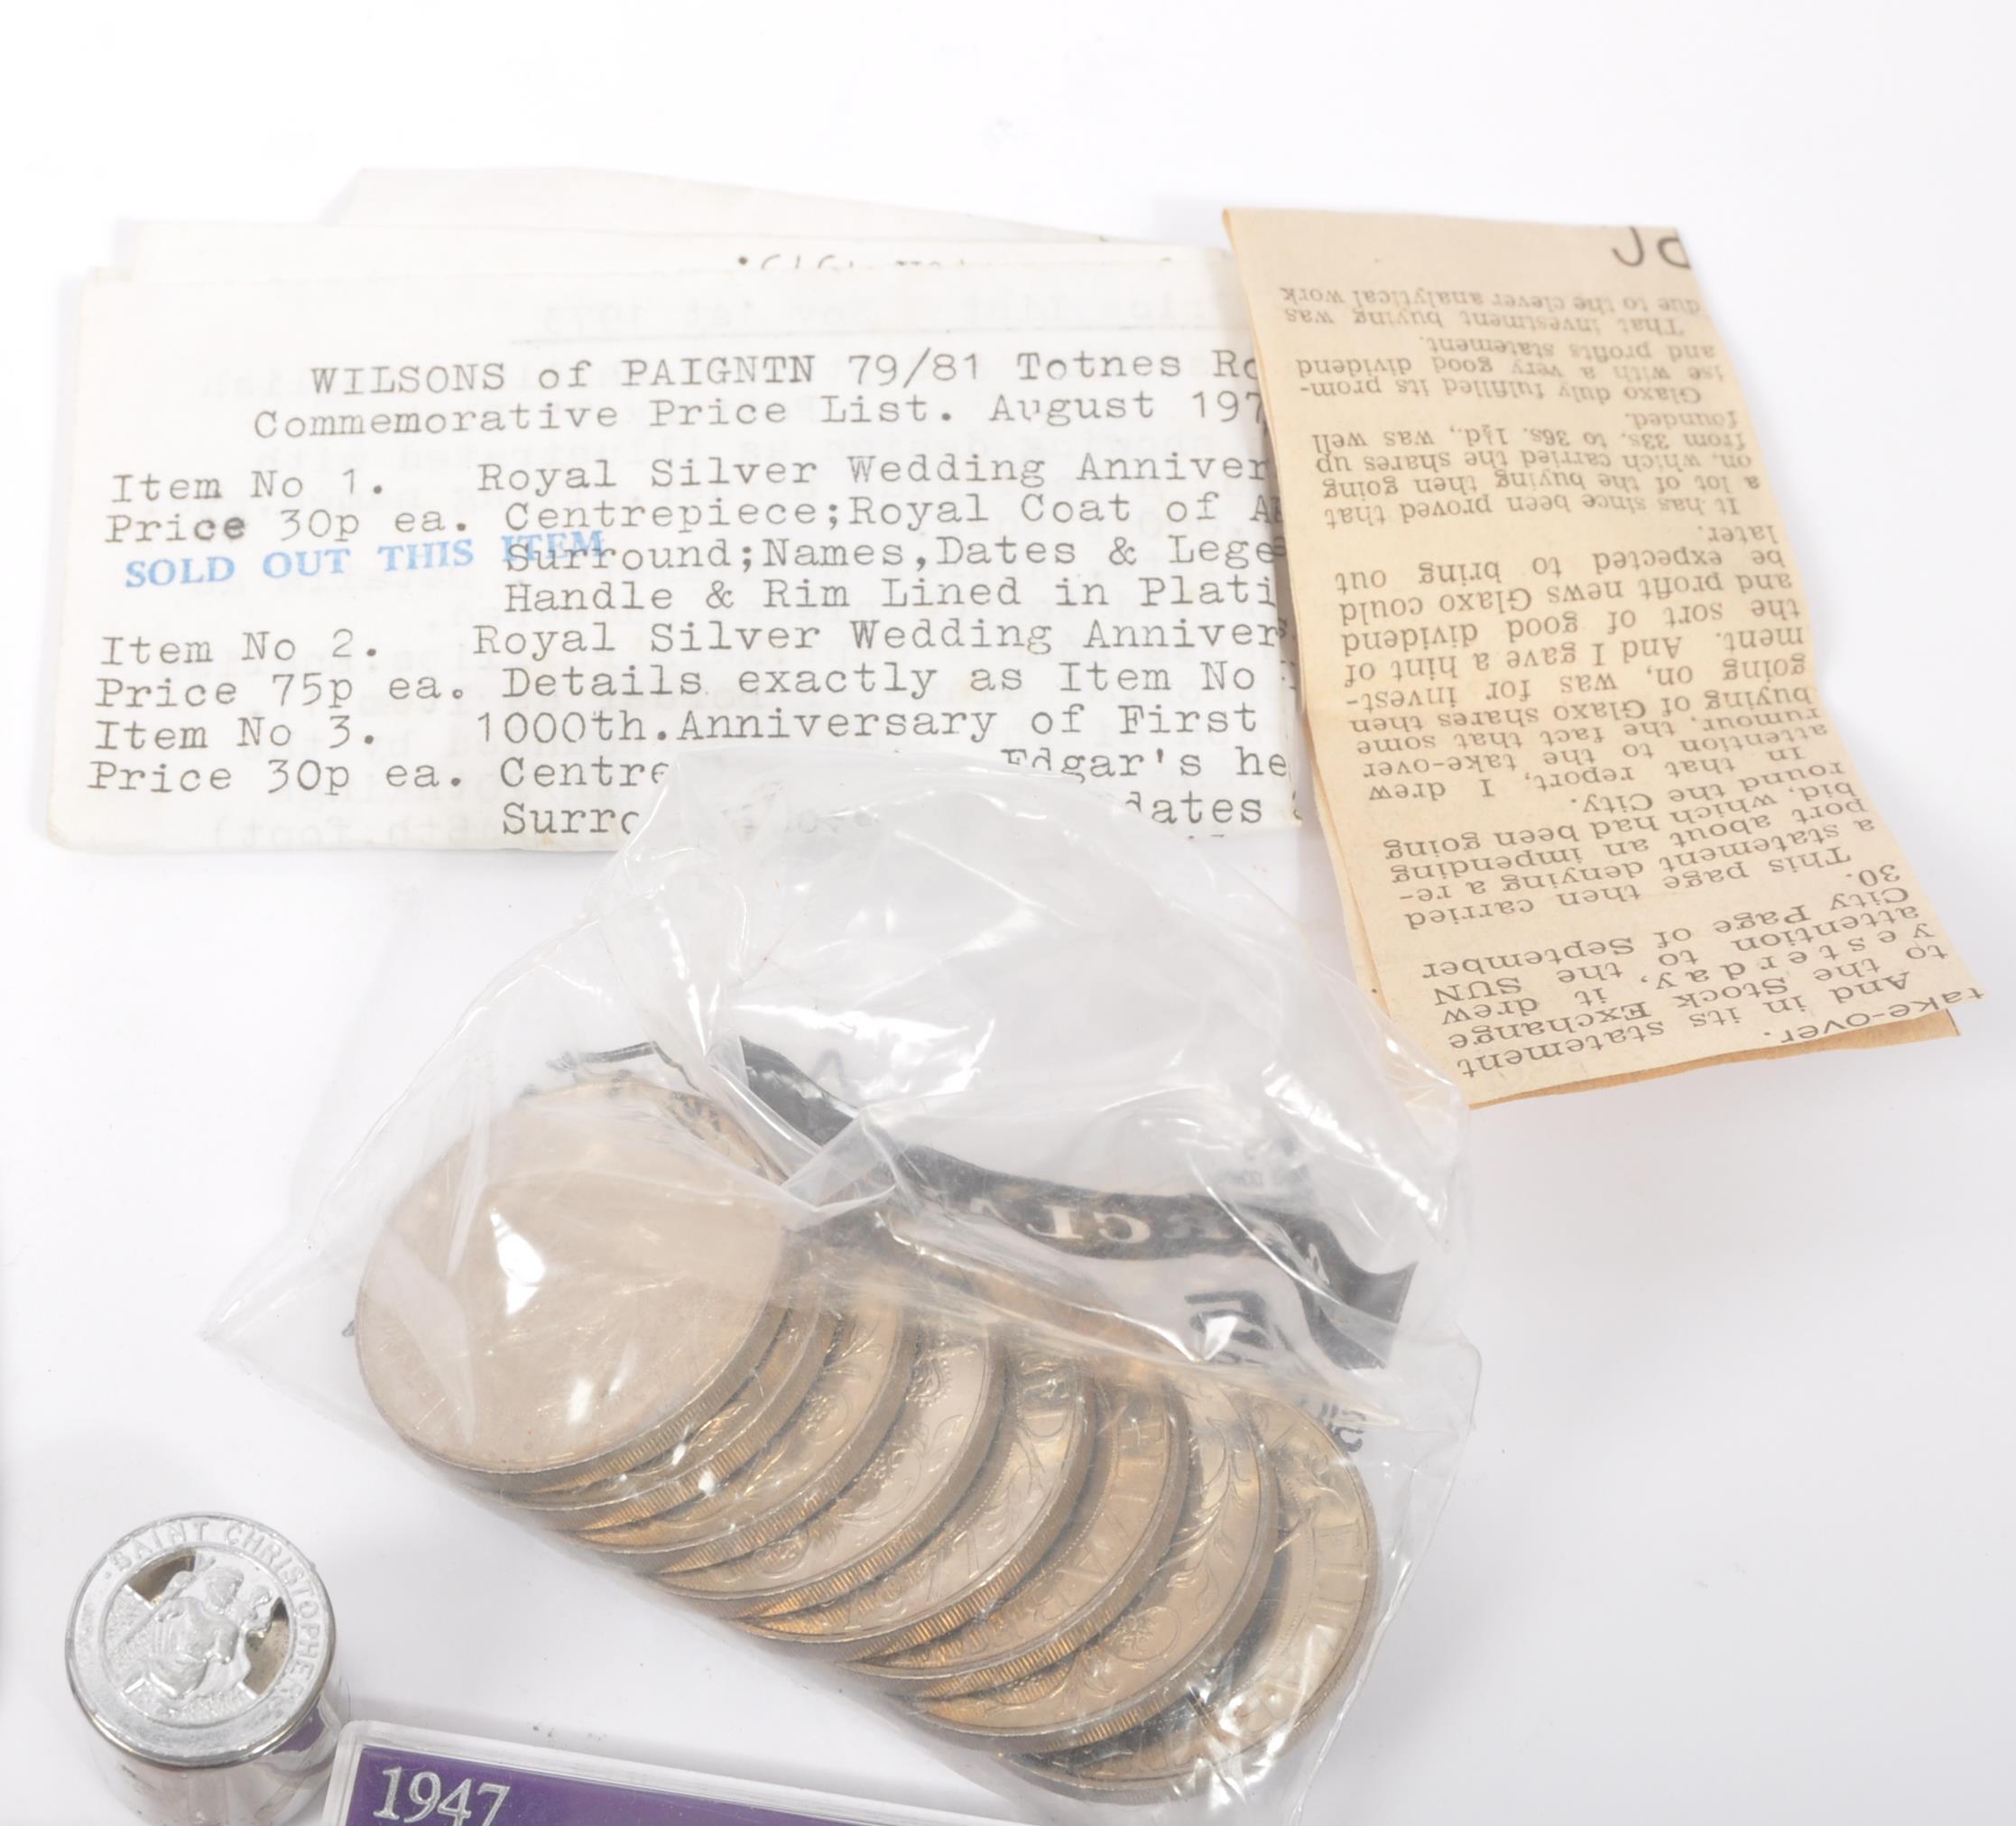 COLLECTION OF 20TH CENTURY BRITISH COMMEMORATIVE COINS - Image 8 of 10